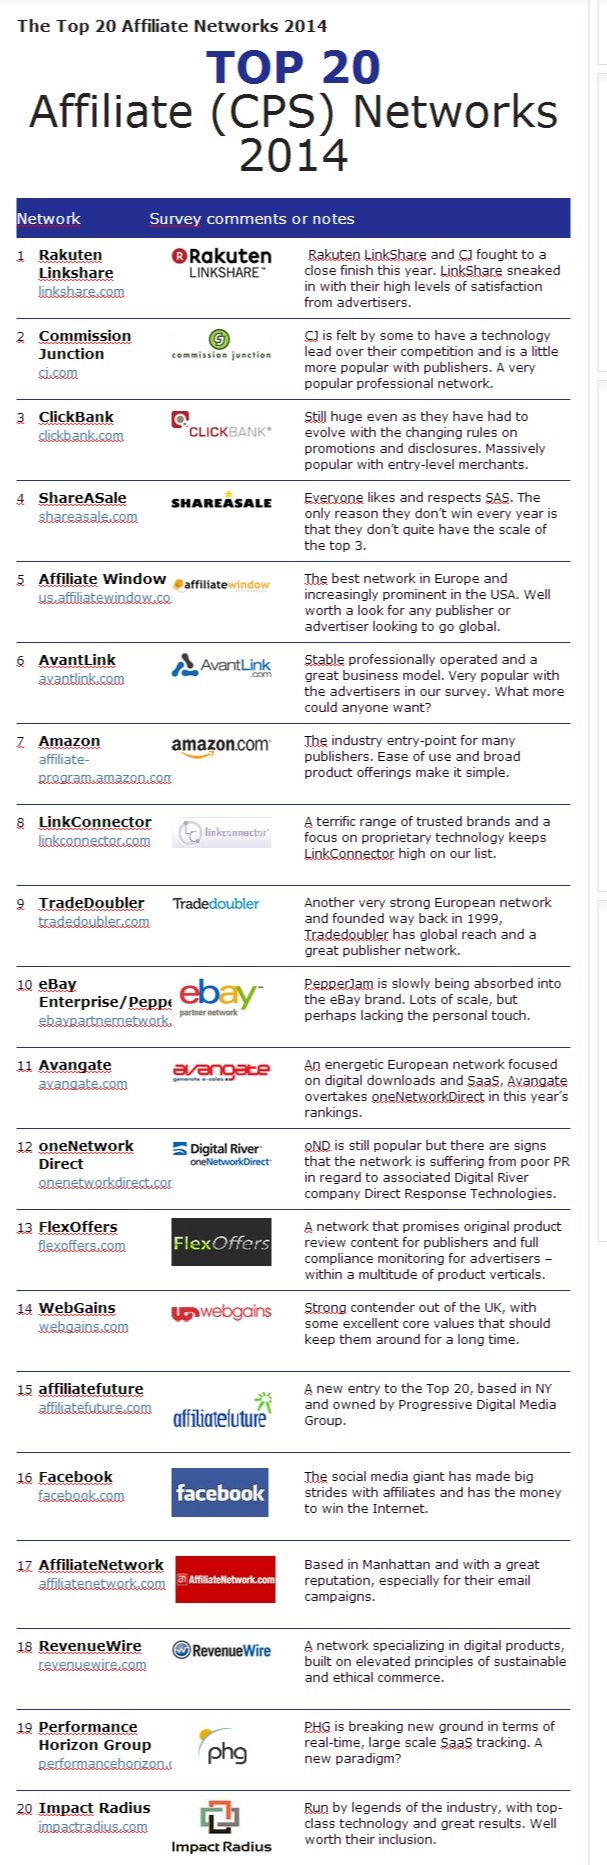 The Top 20 Affiliate Networks 2014 - mThink .